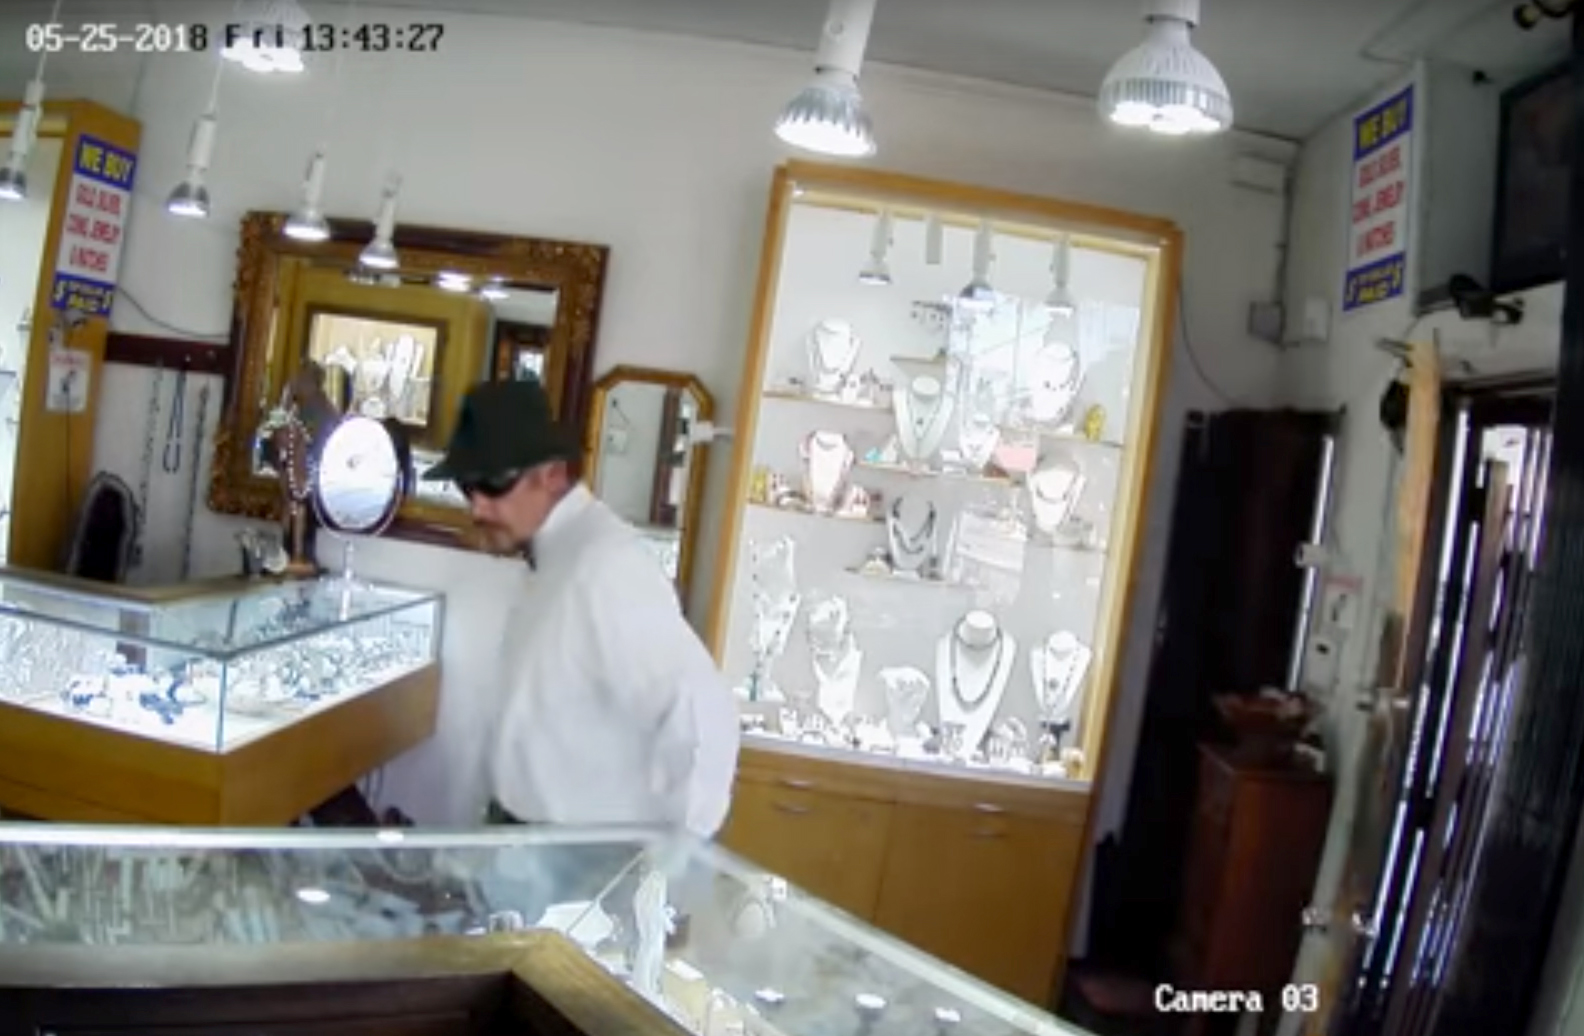 Hammer-wielding men allegedly trying to steal from jewelry store scared ...